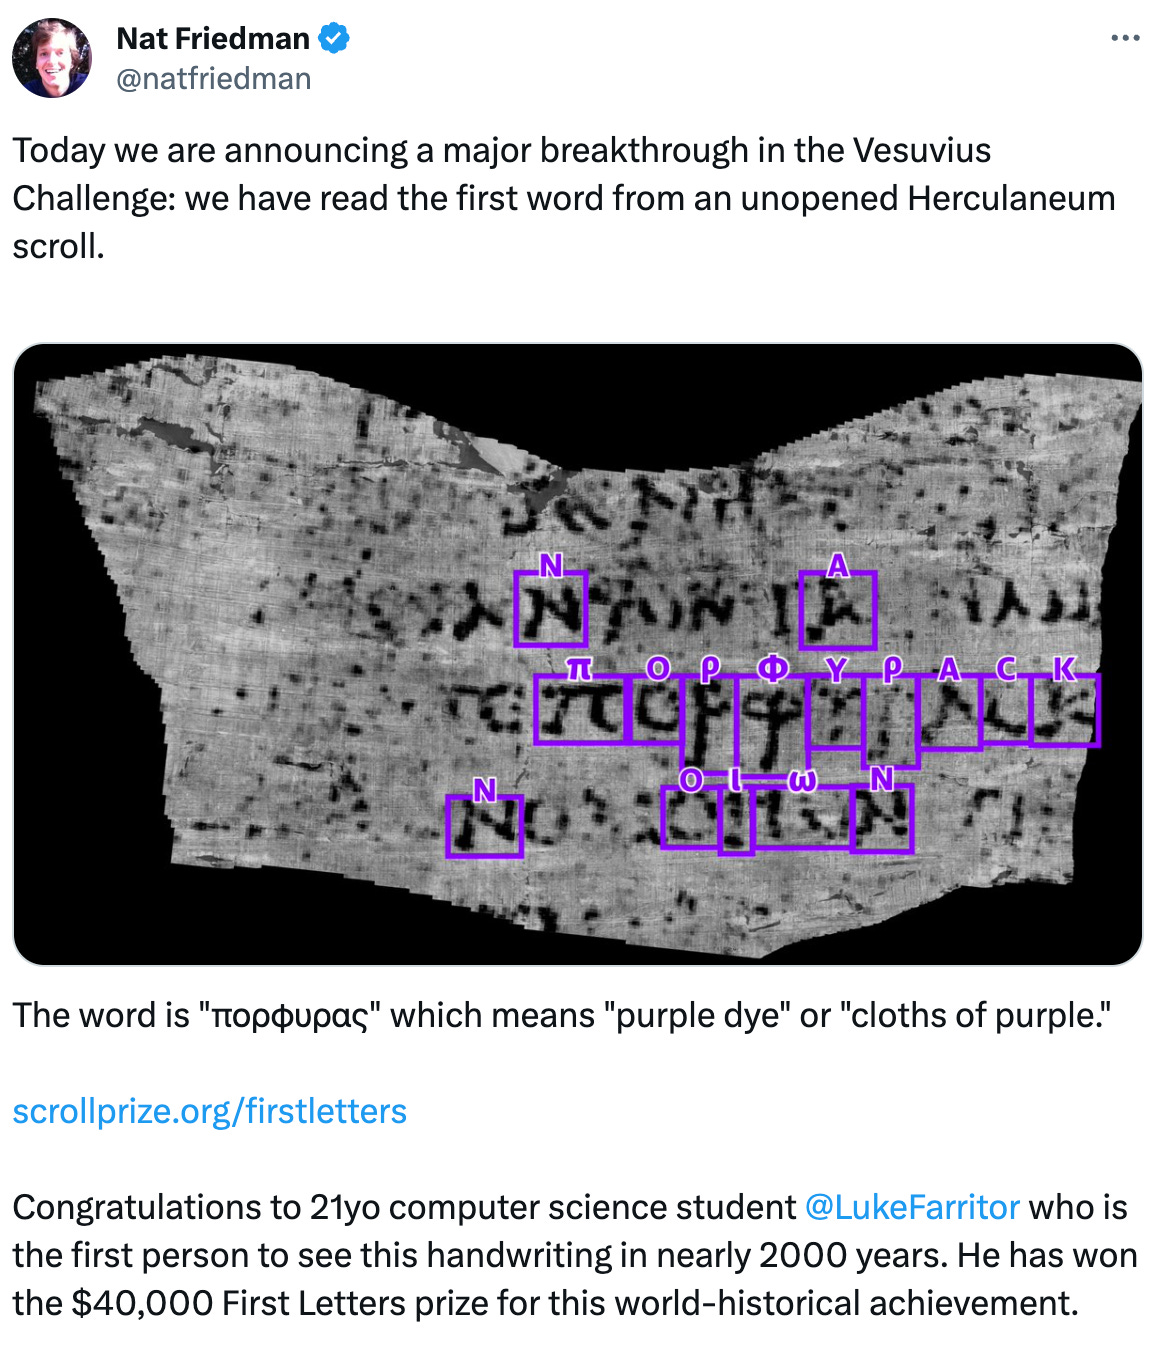  See new posts Conversation Nat Friedman @natfriedman Today we are announcing a major breakthrough in the Vesuvius Challenge: we have read the first word from an unopened Herculaneum scroll.  The word is "πορφυρας" which means "purple dye" or "cloths of purple."  http://scrollprize.org/firstletters  Congratulations to 21yo computer science student  @LukeFarritor  who is the first person to see this handwriting in nearly 2000 years. He has won the $40,000 First Letters prize for this world-historical achievement.  We are also awarding a $10,000 First Ink prize to  @CJHandmer  who was the first person to see ink and multiple letters within an unopened scroll. His work was the basis of Luke's ML model.  And  @Youssef_M_Nader  has won a $10,000 second-place First Letters prize for producing the clearest and most comprehensive images from inside a scroll yet.  This has been the dream of many people since the scrolls were first discovered in the 1750s. It is also the result of 20 years of work from Dr. Brent Seales and his team at EduceLab, whose years of dedicated work have made this last mile possible.  The $700,000 Vesuvius Challenge Grand Prize is now in sight. Who will claim it?